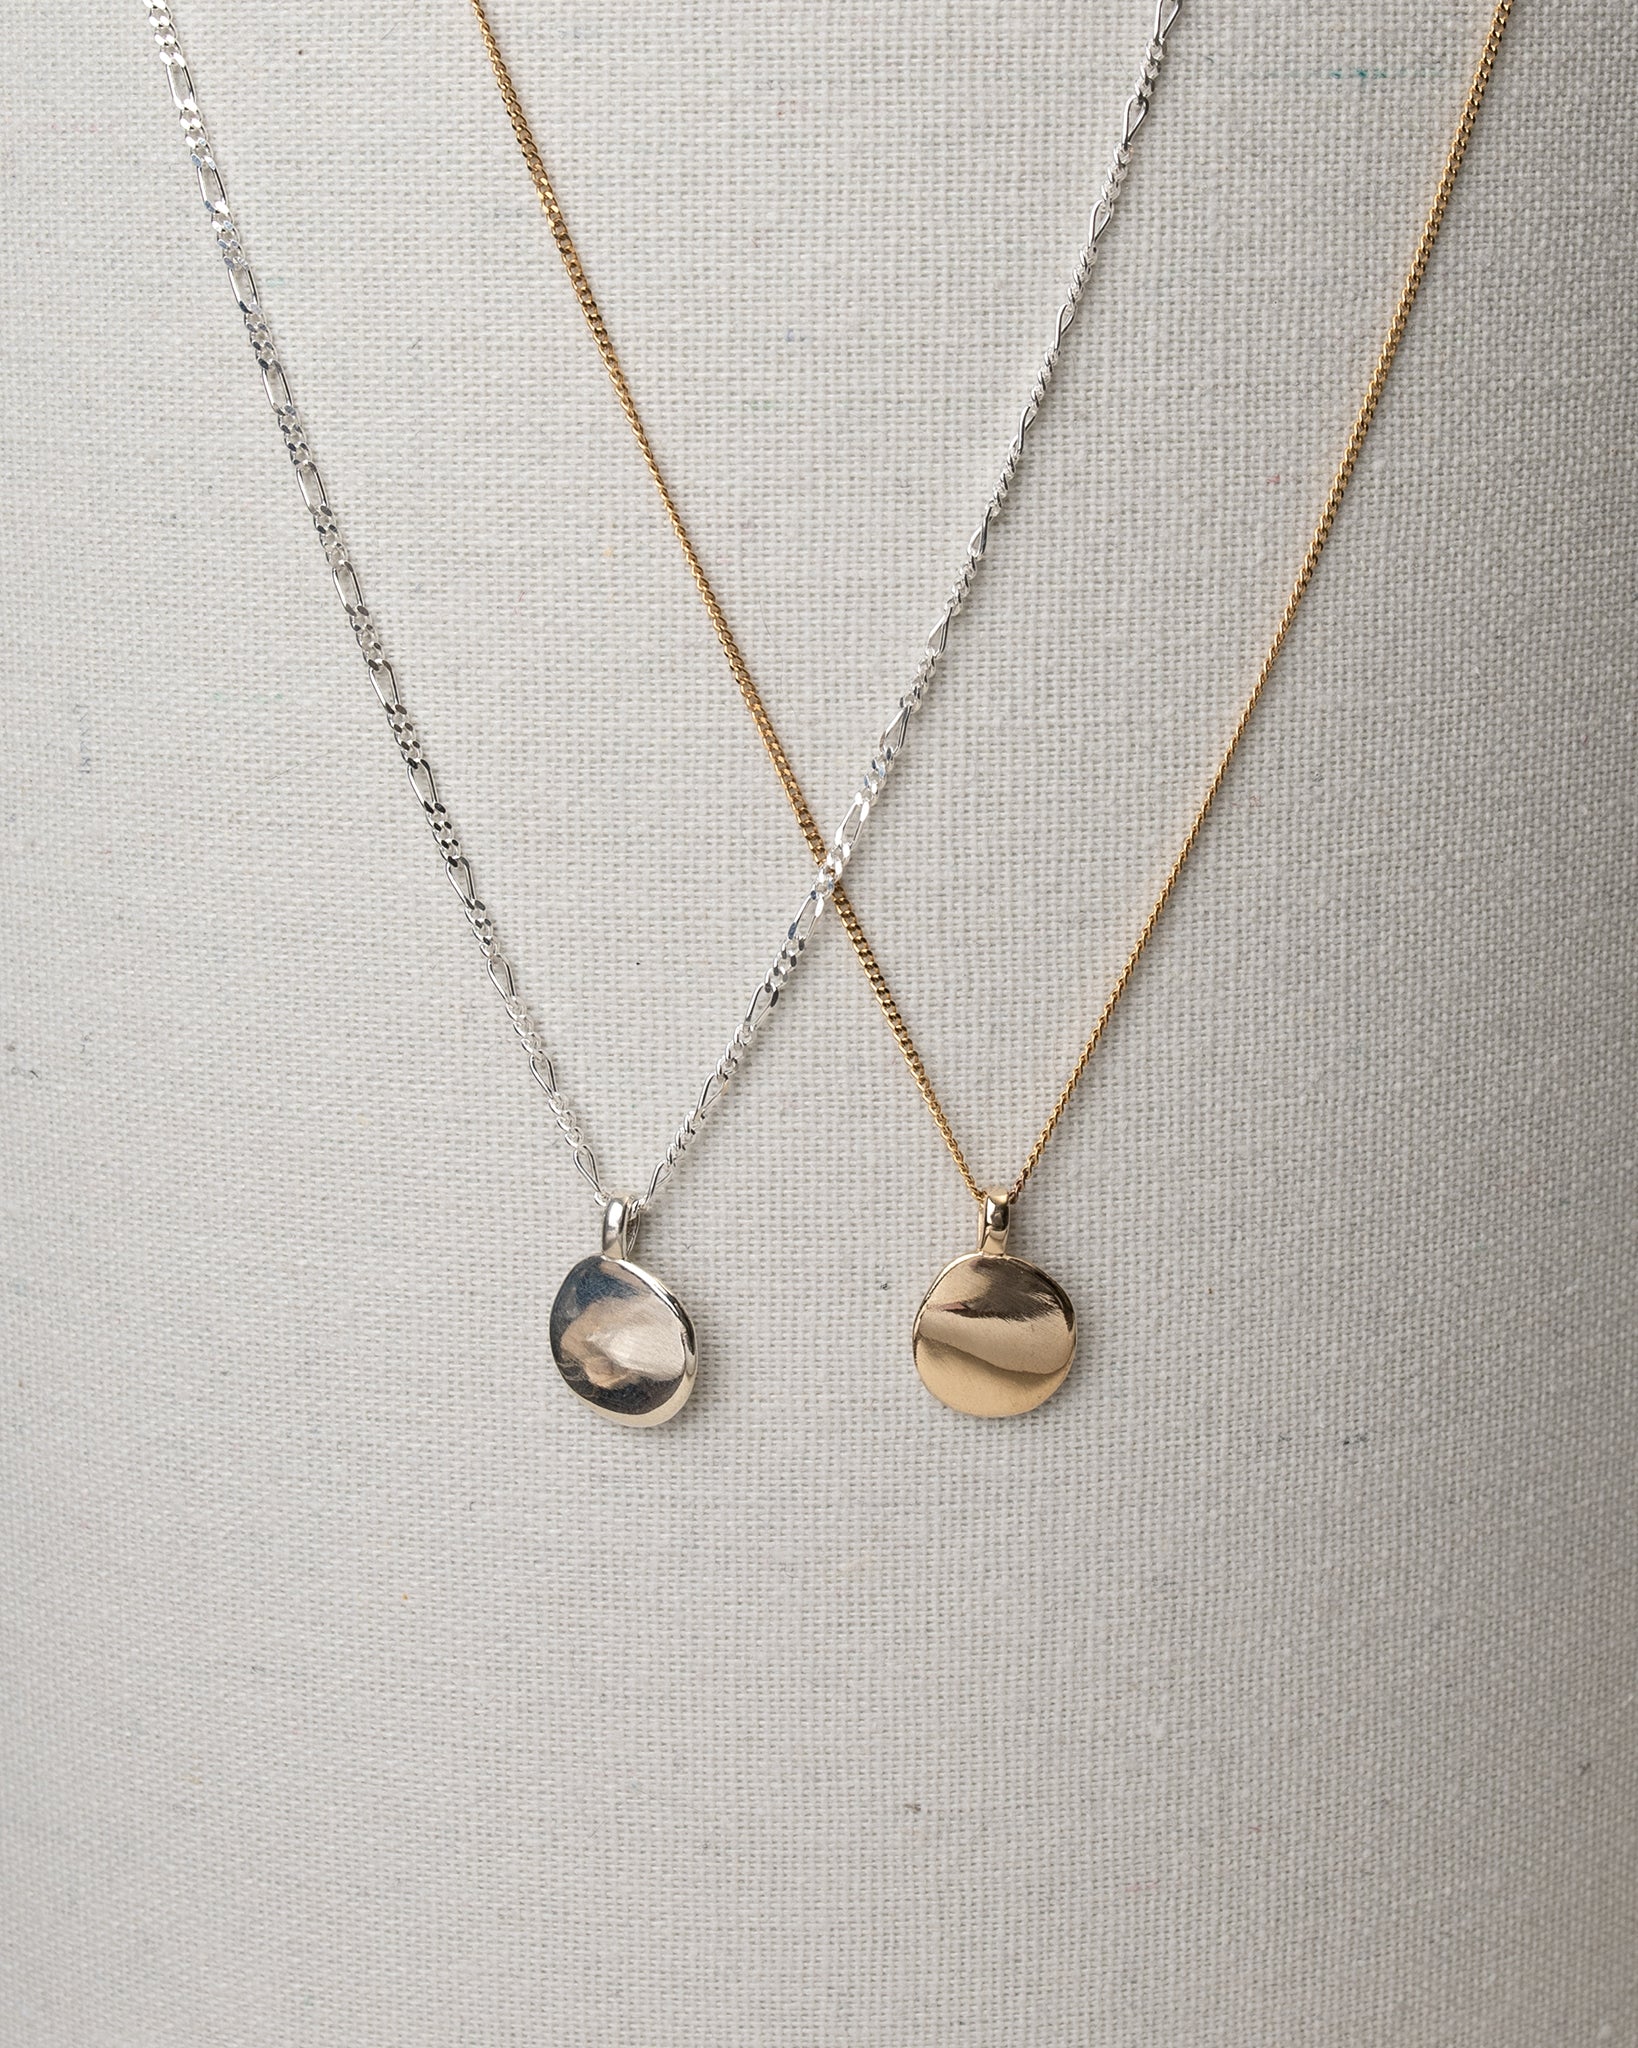 Silver and gold oval pendant necklaces hanging on canvas